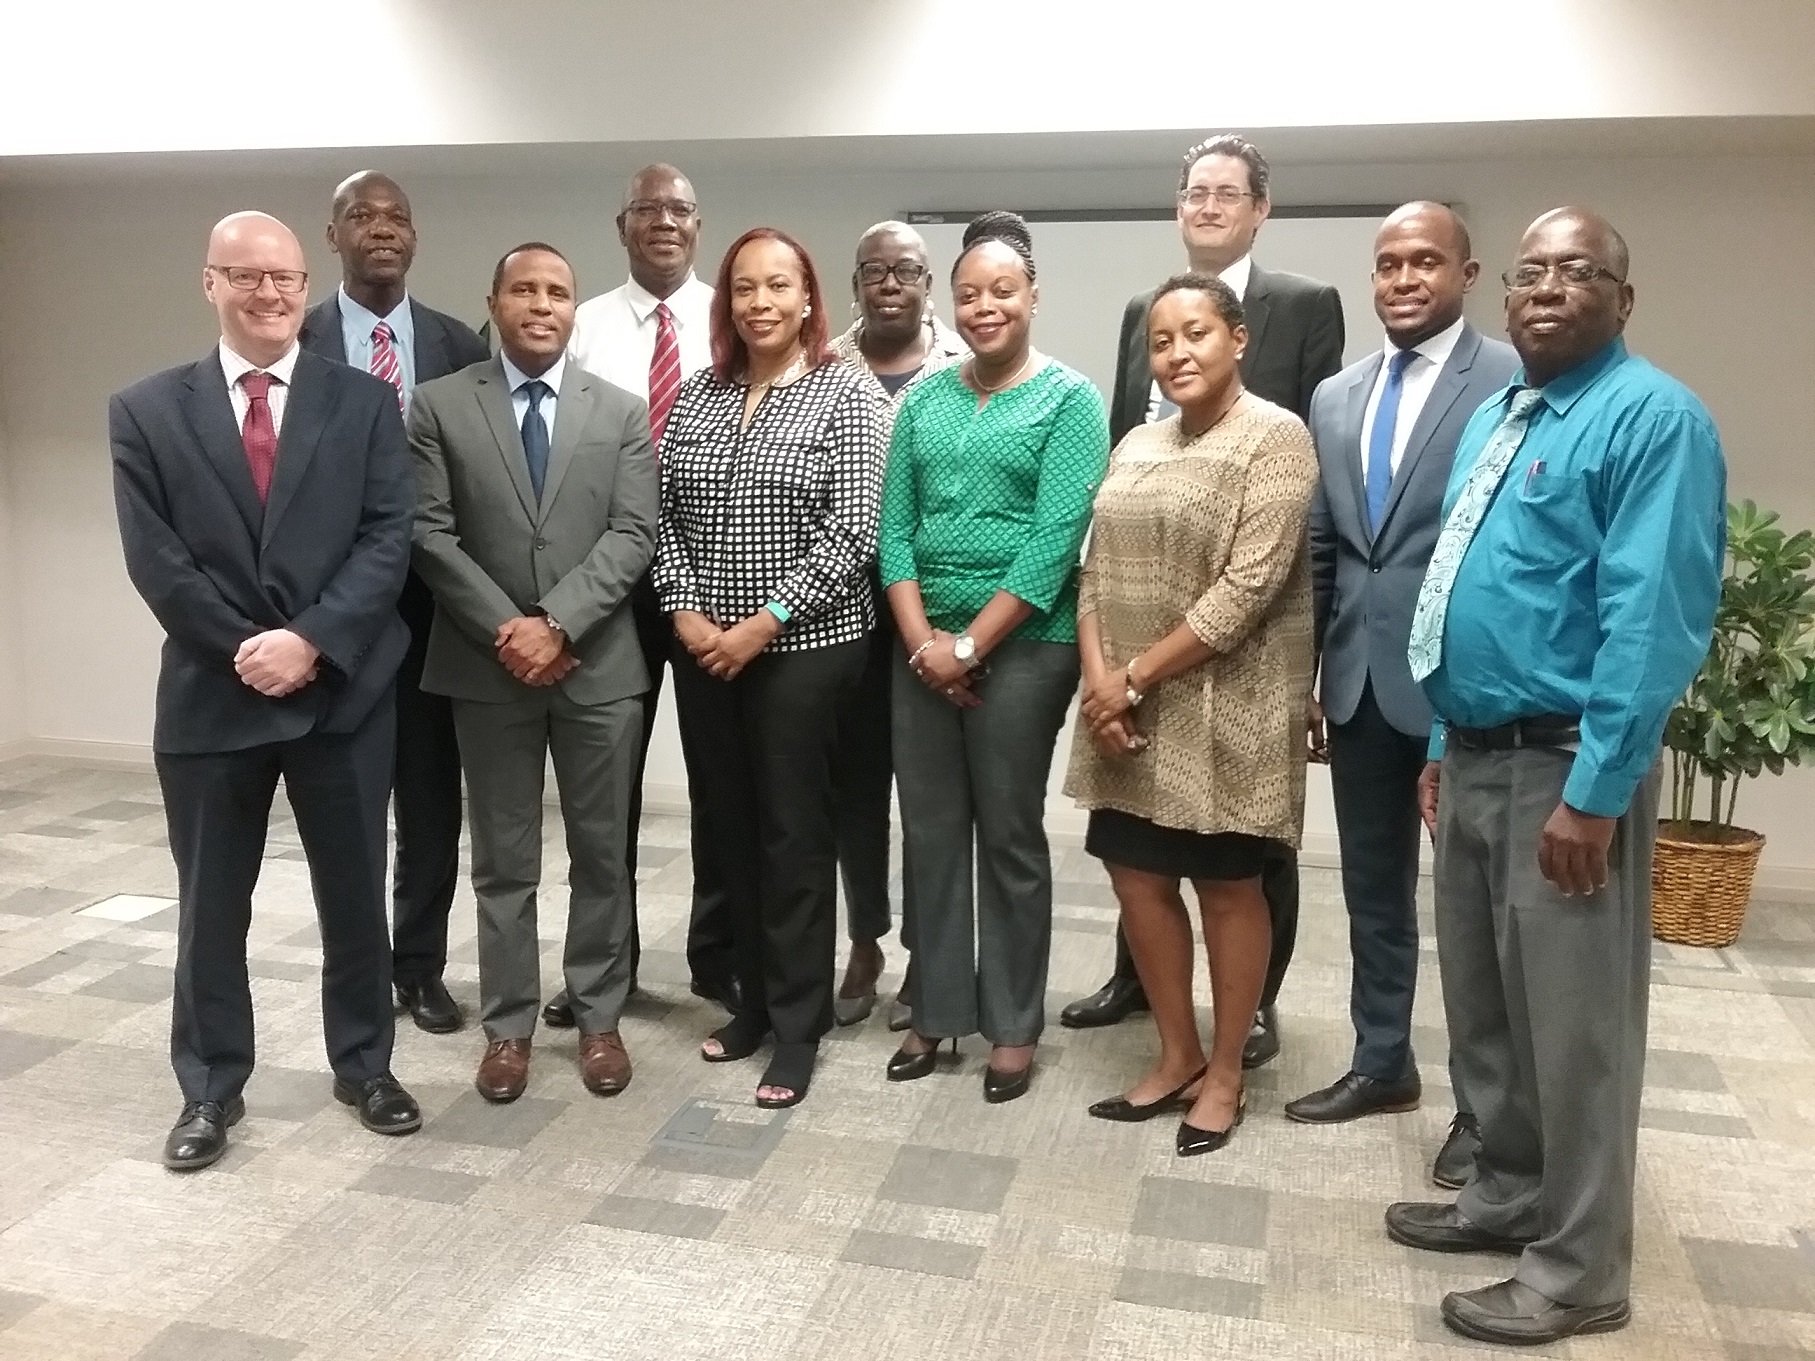 The CDB delegation and officials from the Government of St. Kitts and Nevis during a meeting held on October 6, 2017, the final day of the mission.